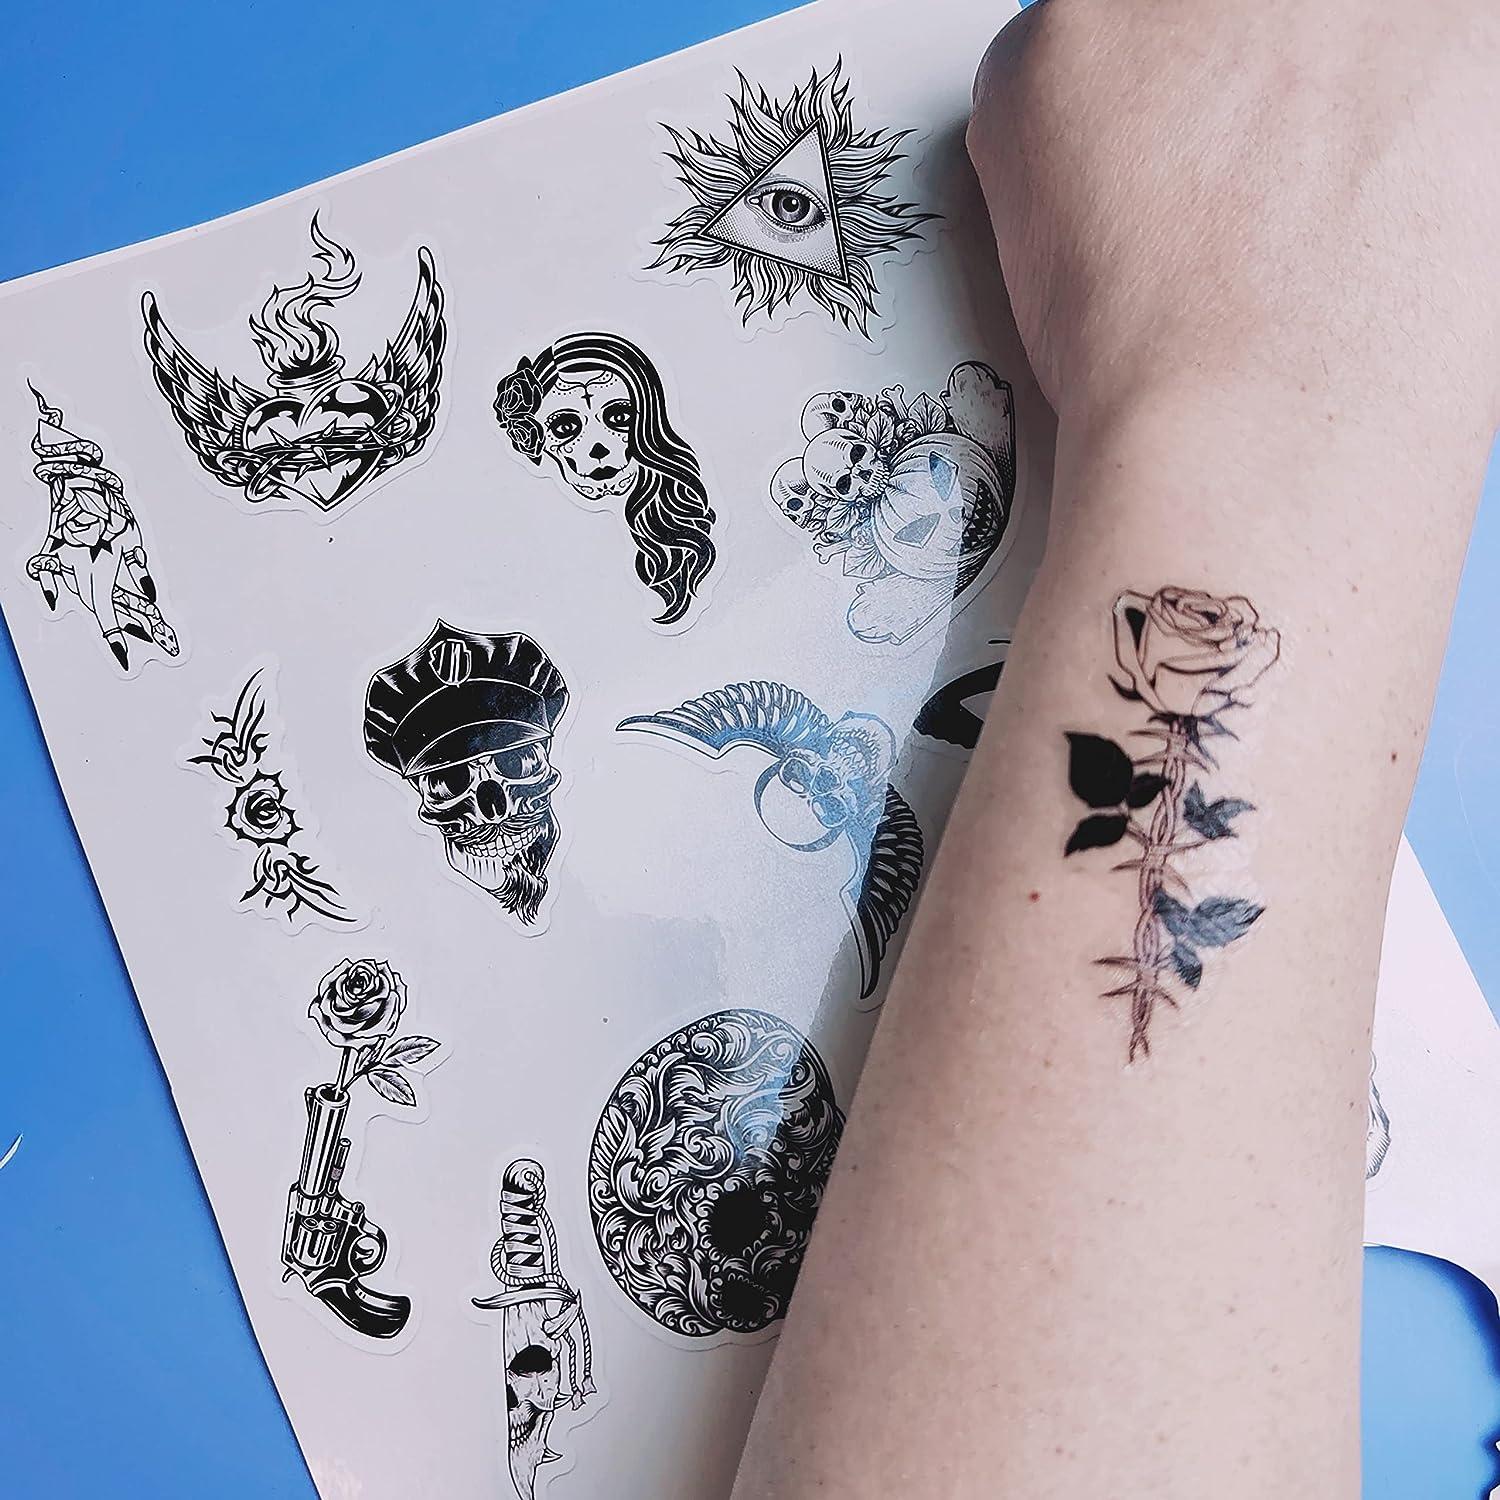 5 sheets Temporary Tattoo Transfer Decal Paper INKJET Printer Only